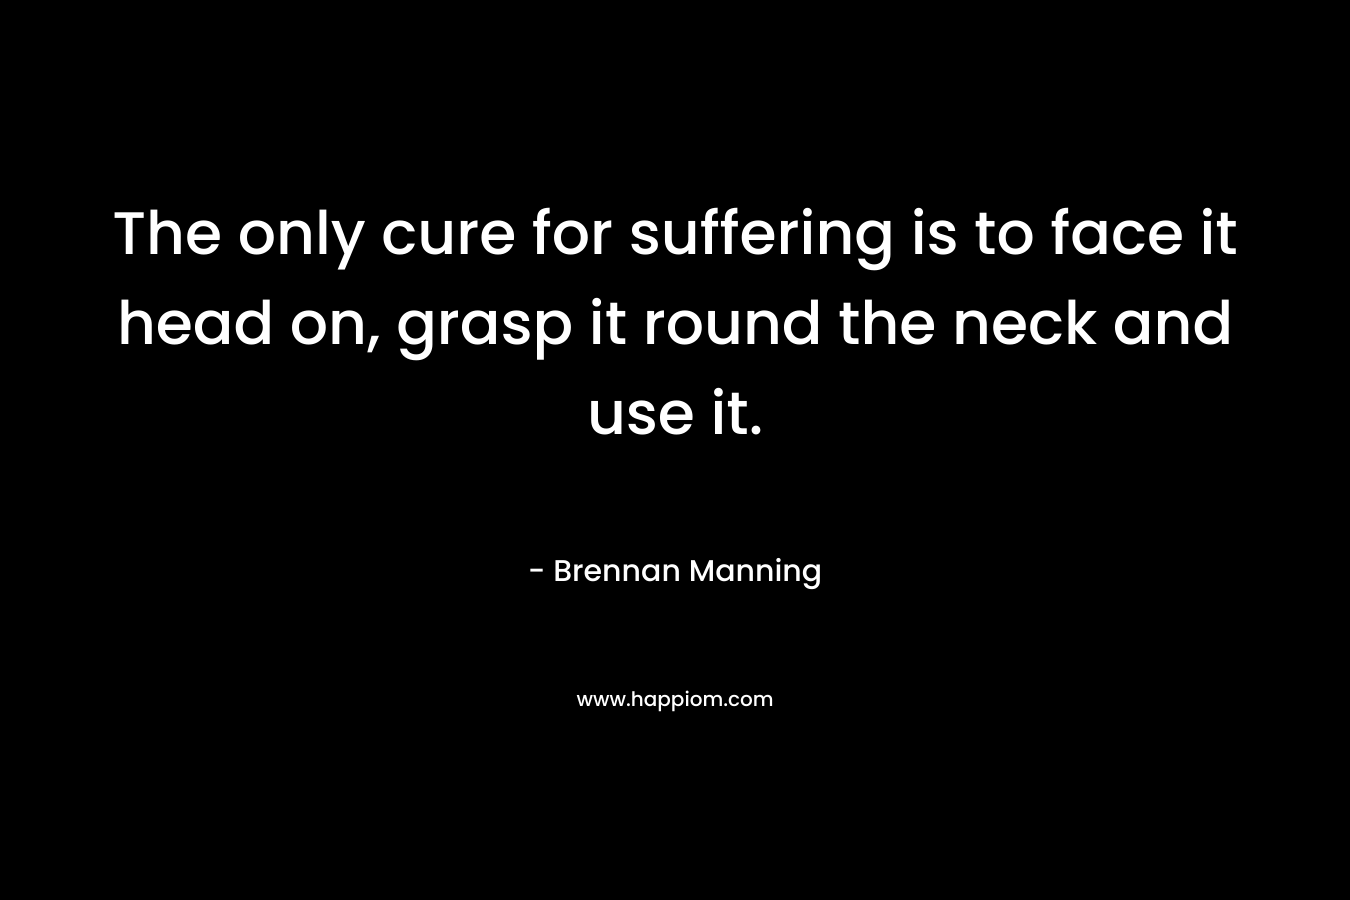 The only cure for suffering is to face it head on, grasp it round the neck and use it. – Brennan Manning